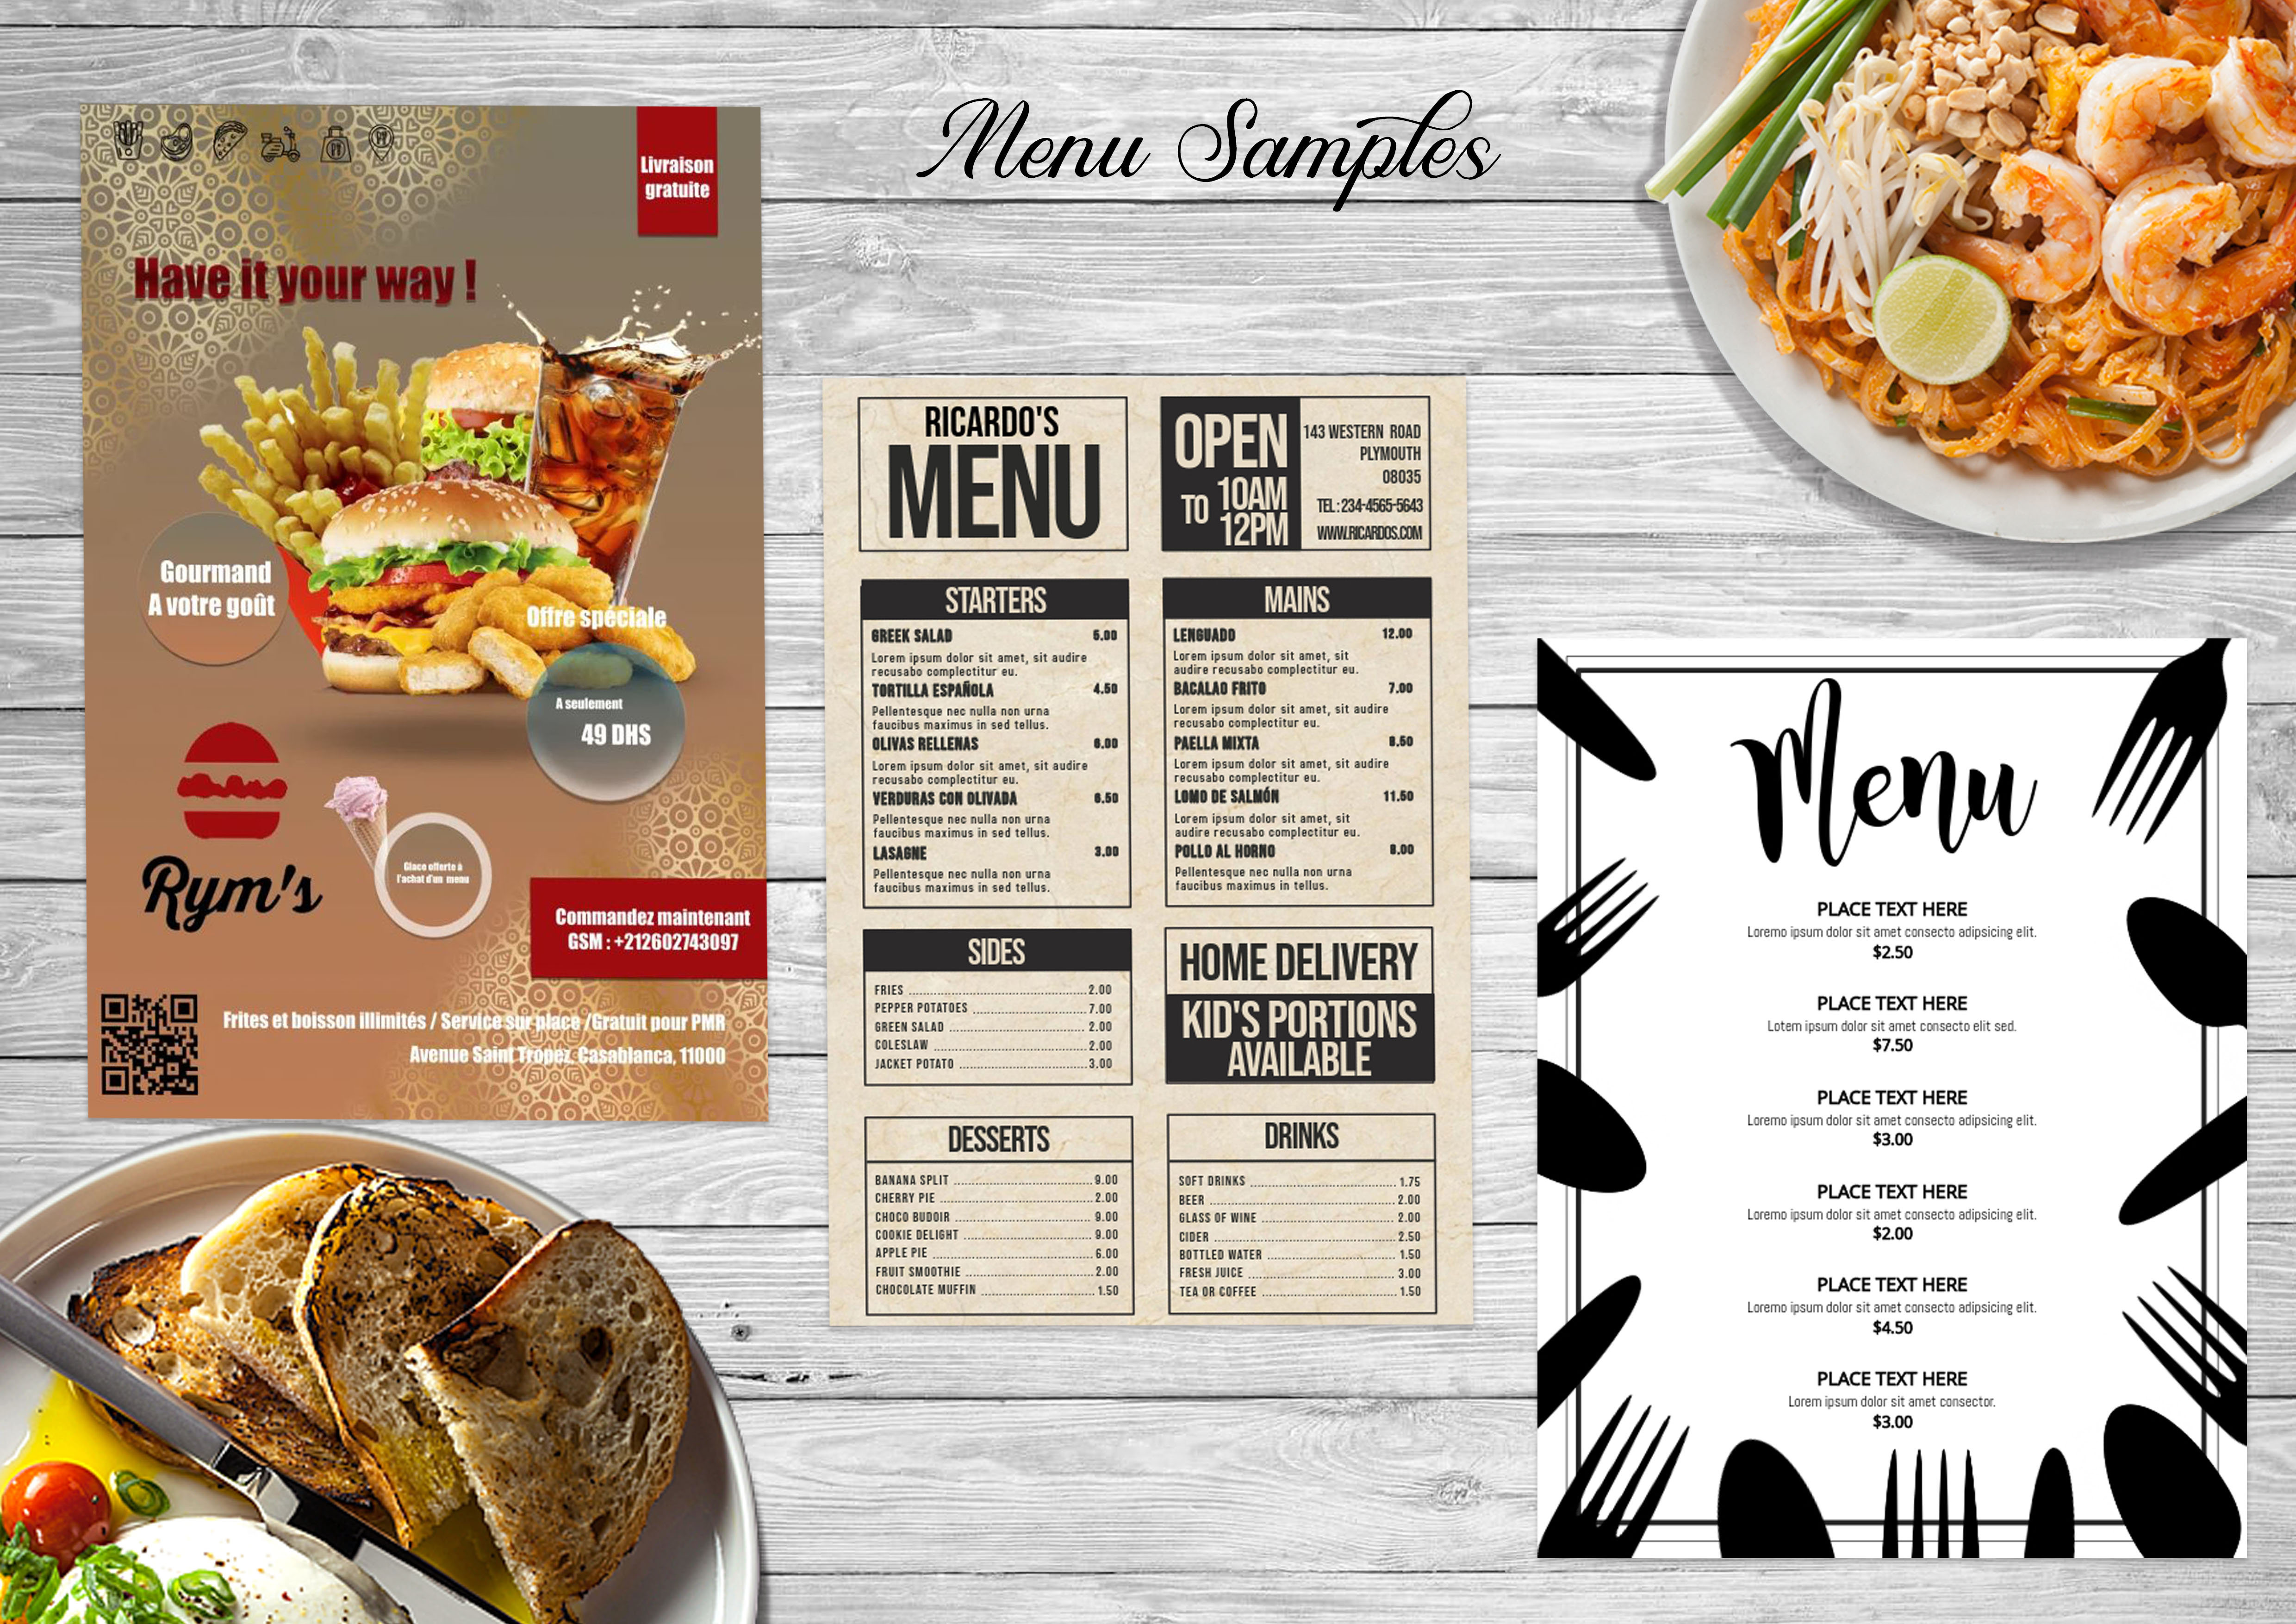 Great restaurant menus and flyers within 4 hours for 5 SEOClerks